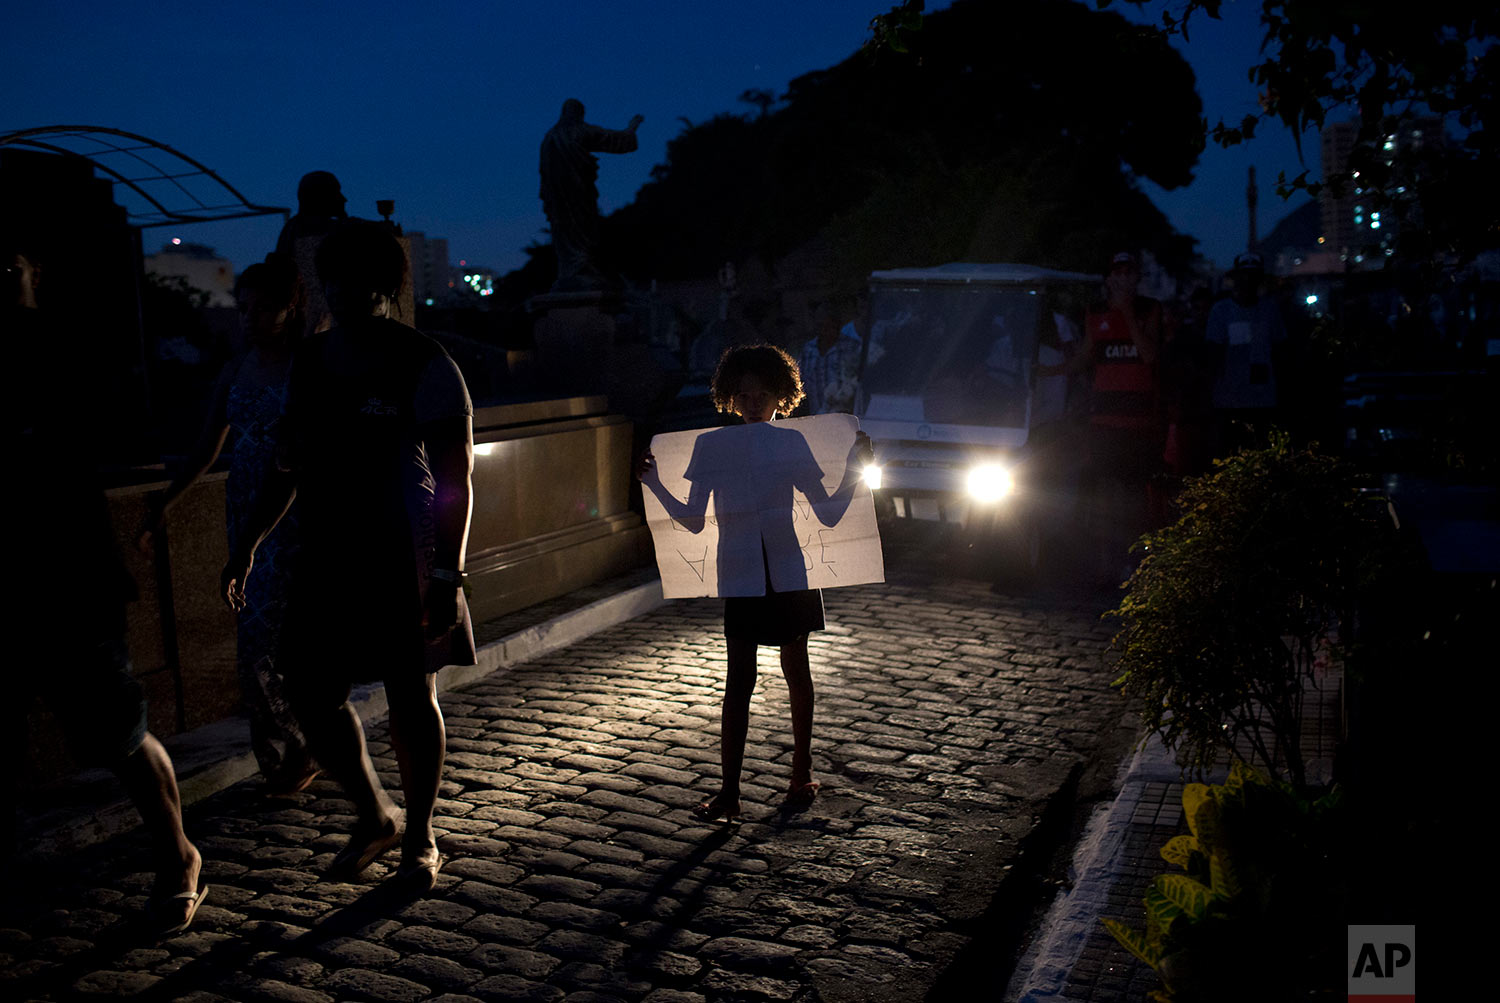  A child holds a sign protesting the death of teenager Marcos Vinicius da Silva, illuminated by the headlights of the vehicle transporting the coffin containing his remains to a cemetery in Rio de Janeiro, Brazil, June 21, 2018. Da Silva is one of tw